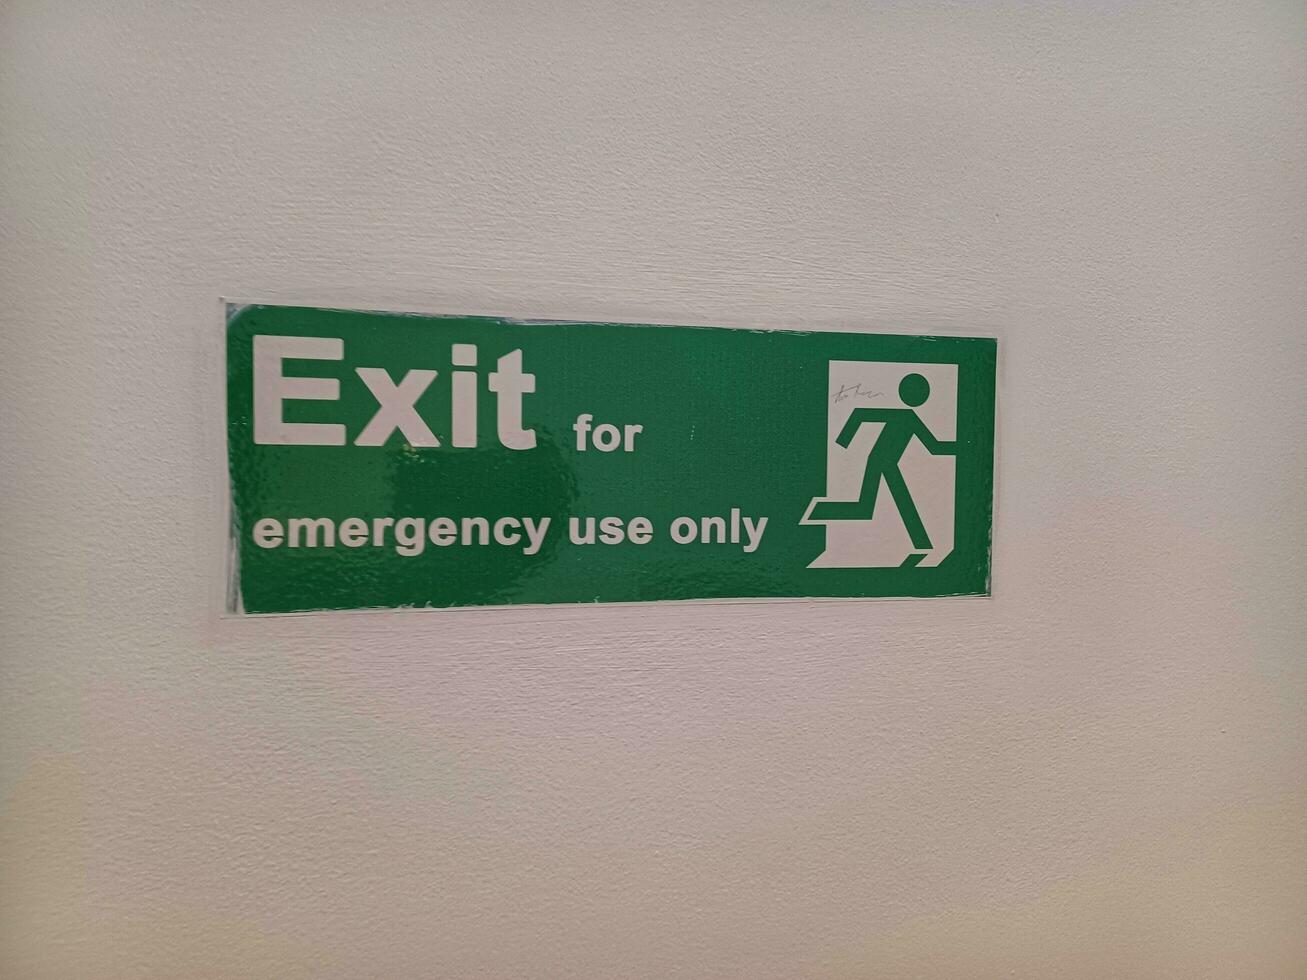 National stainless steel safety sign board,green and white signboard fire exit ,emergency exit sign,rectangular emergecy exit sign photo